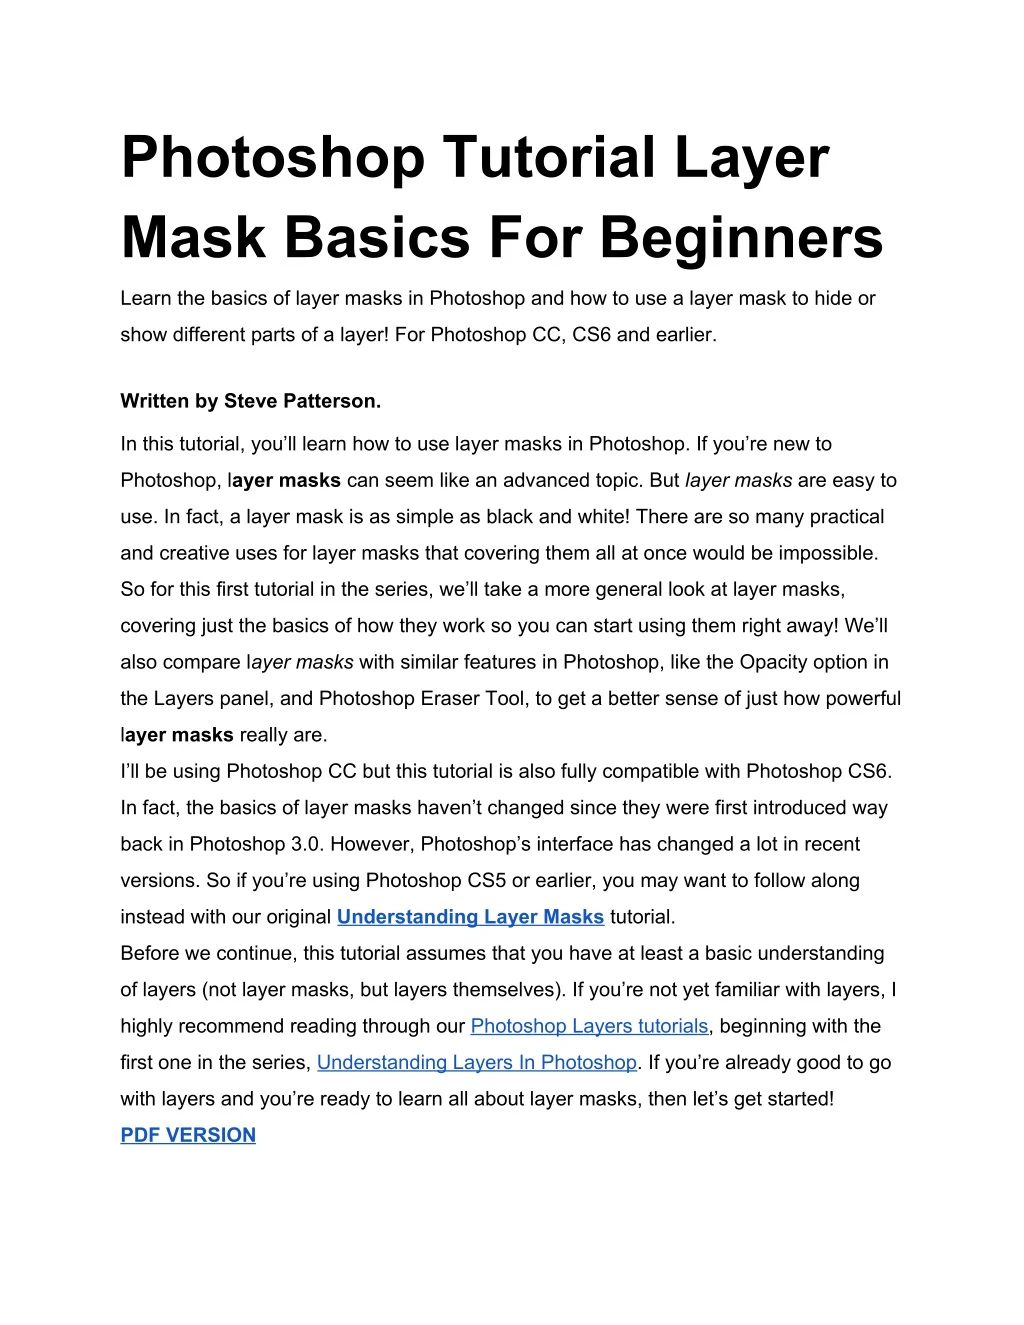 photoshop tutorial layer mask basics for beginners